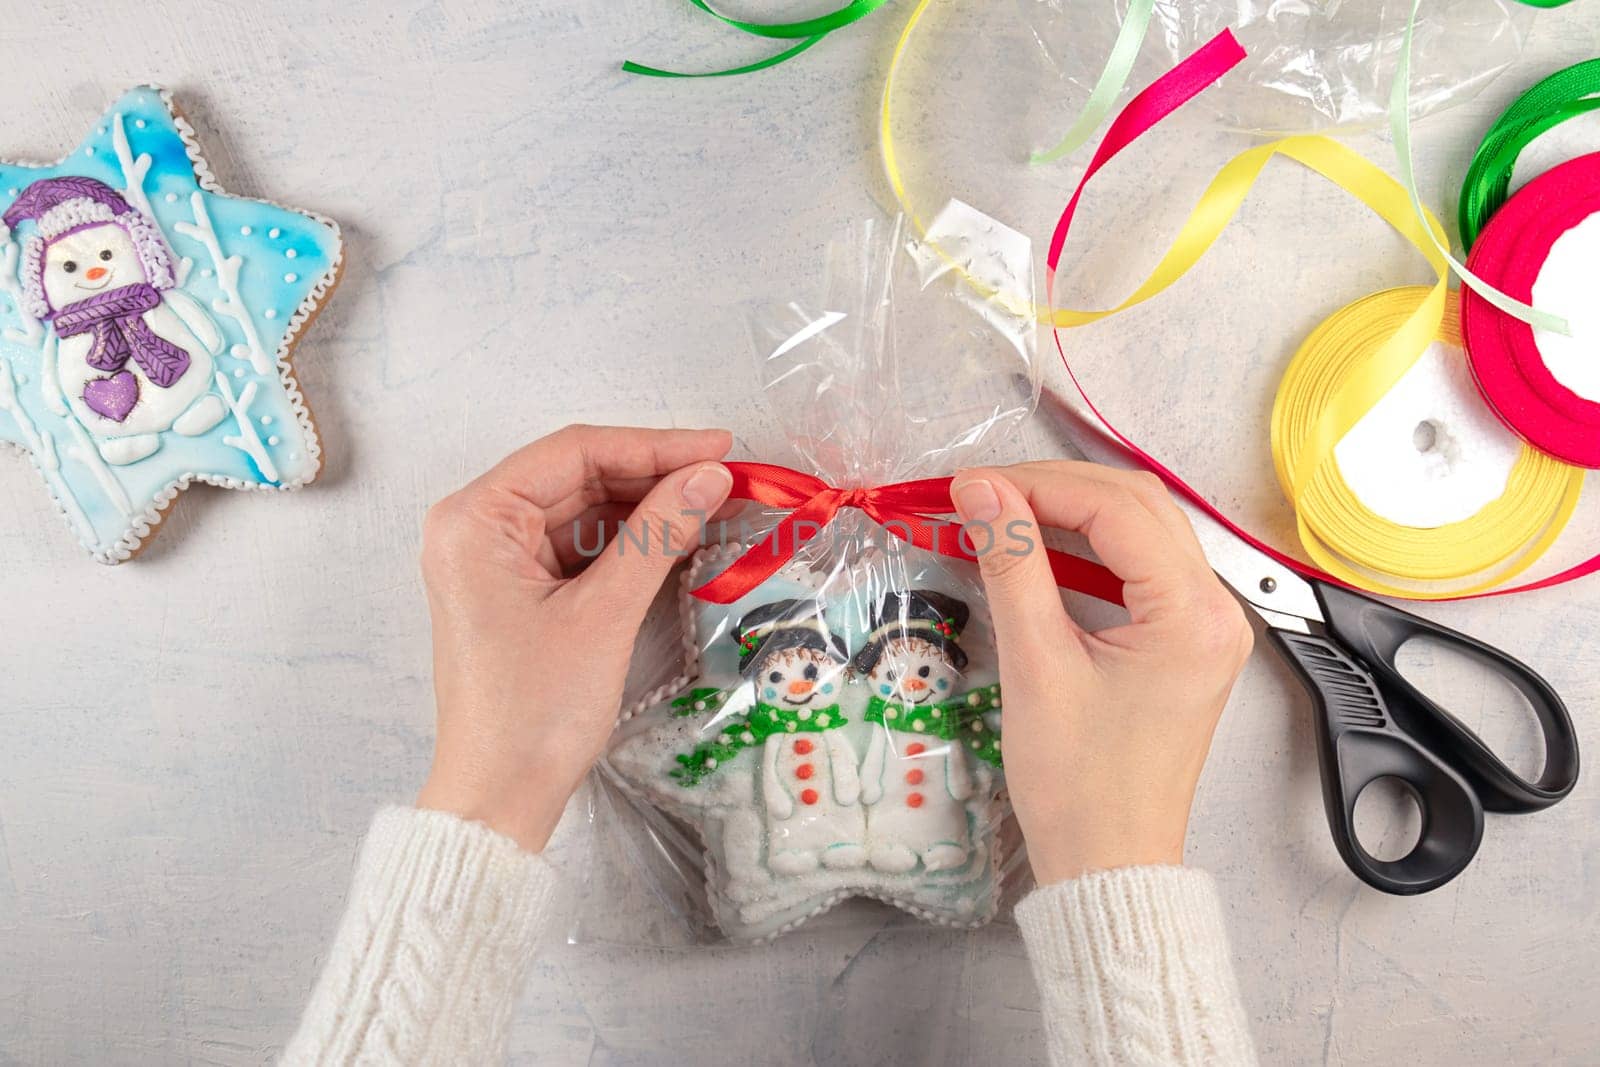 female hands in white sweater tie red bow on package of gingerbread cookies with snowmen on background of light table, multi-colored ribbons and scissors. concept for self-made Christmas or New Year gifts. by Leoschka